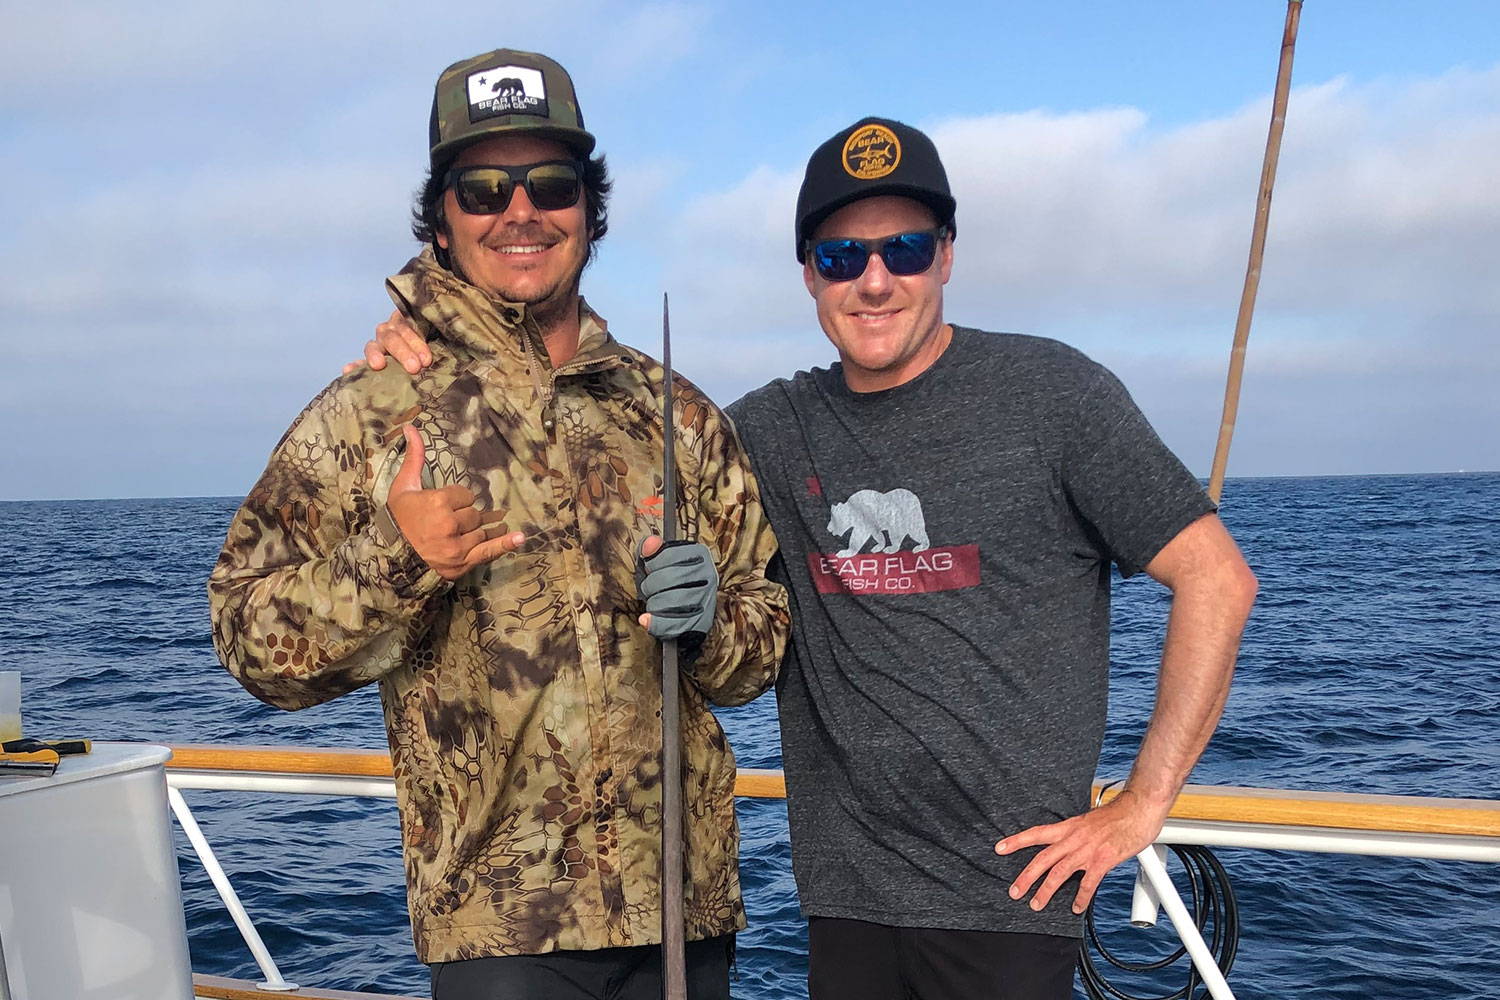 Owner Thos Carson with Captain Nate on the Bear Flag Boat At Sea.